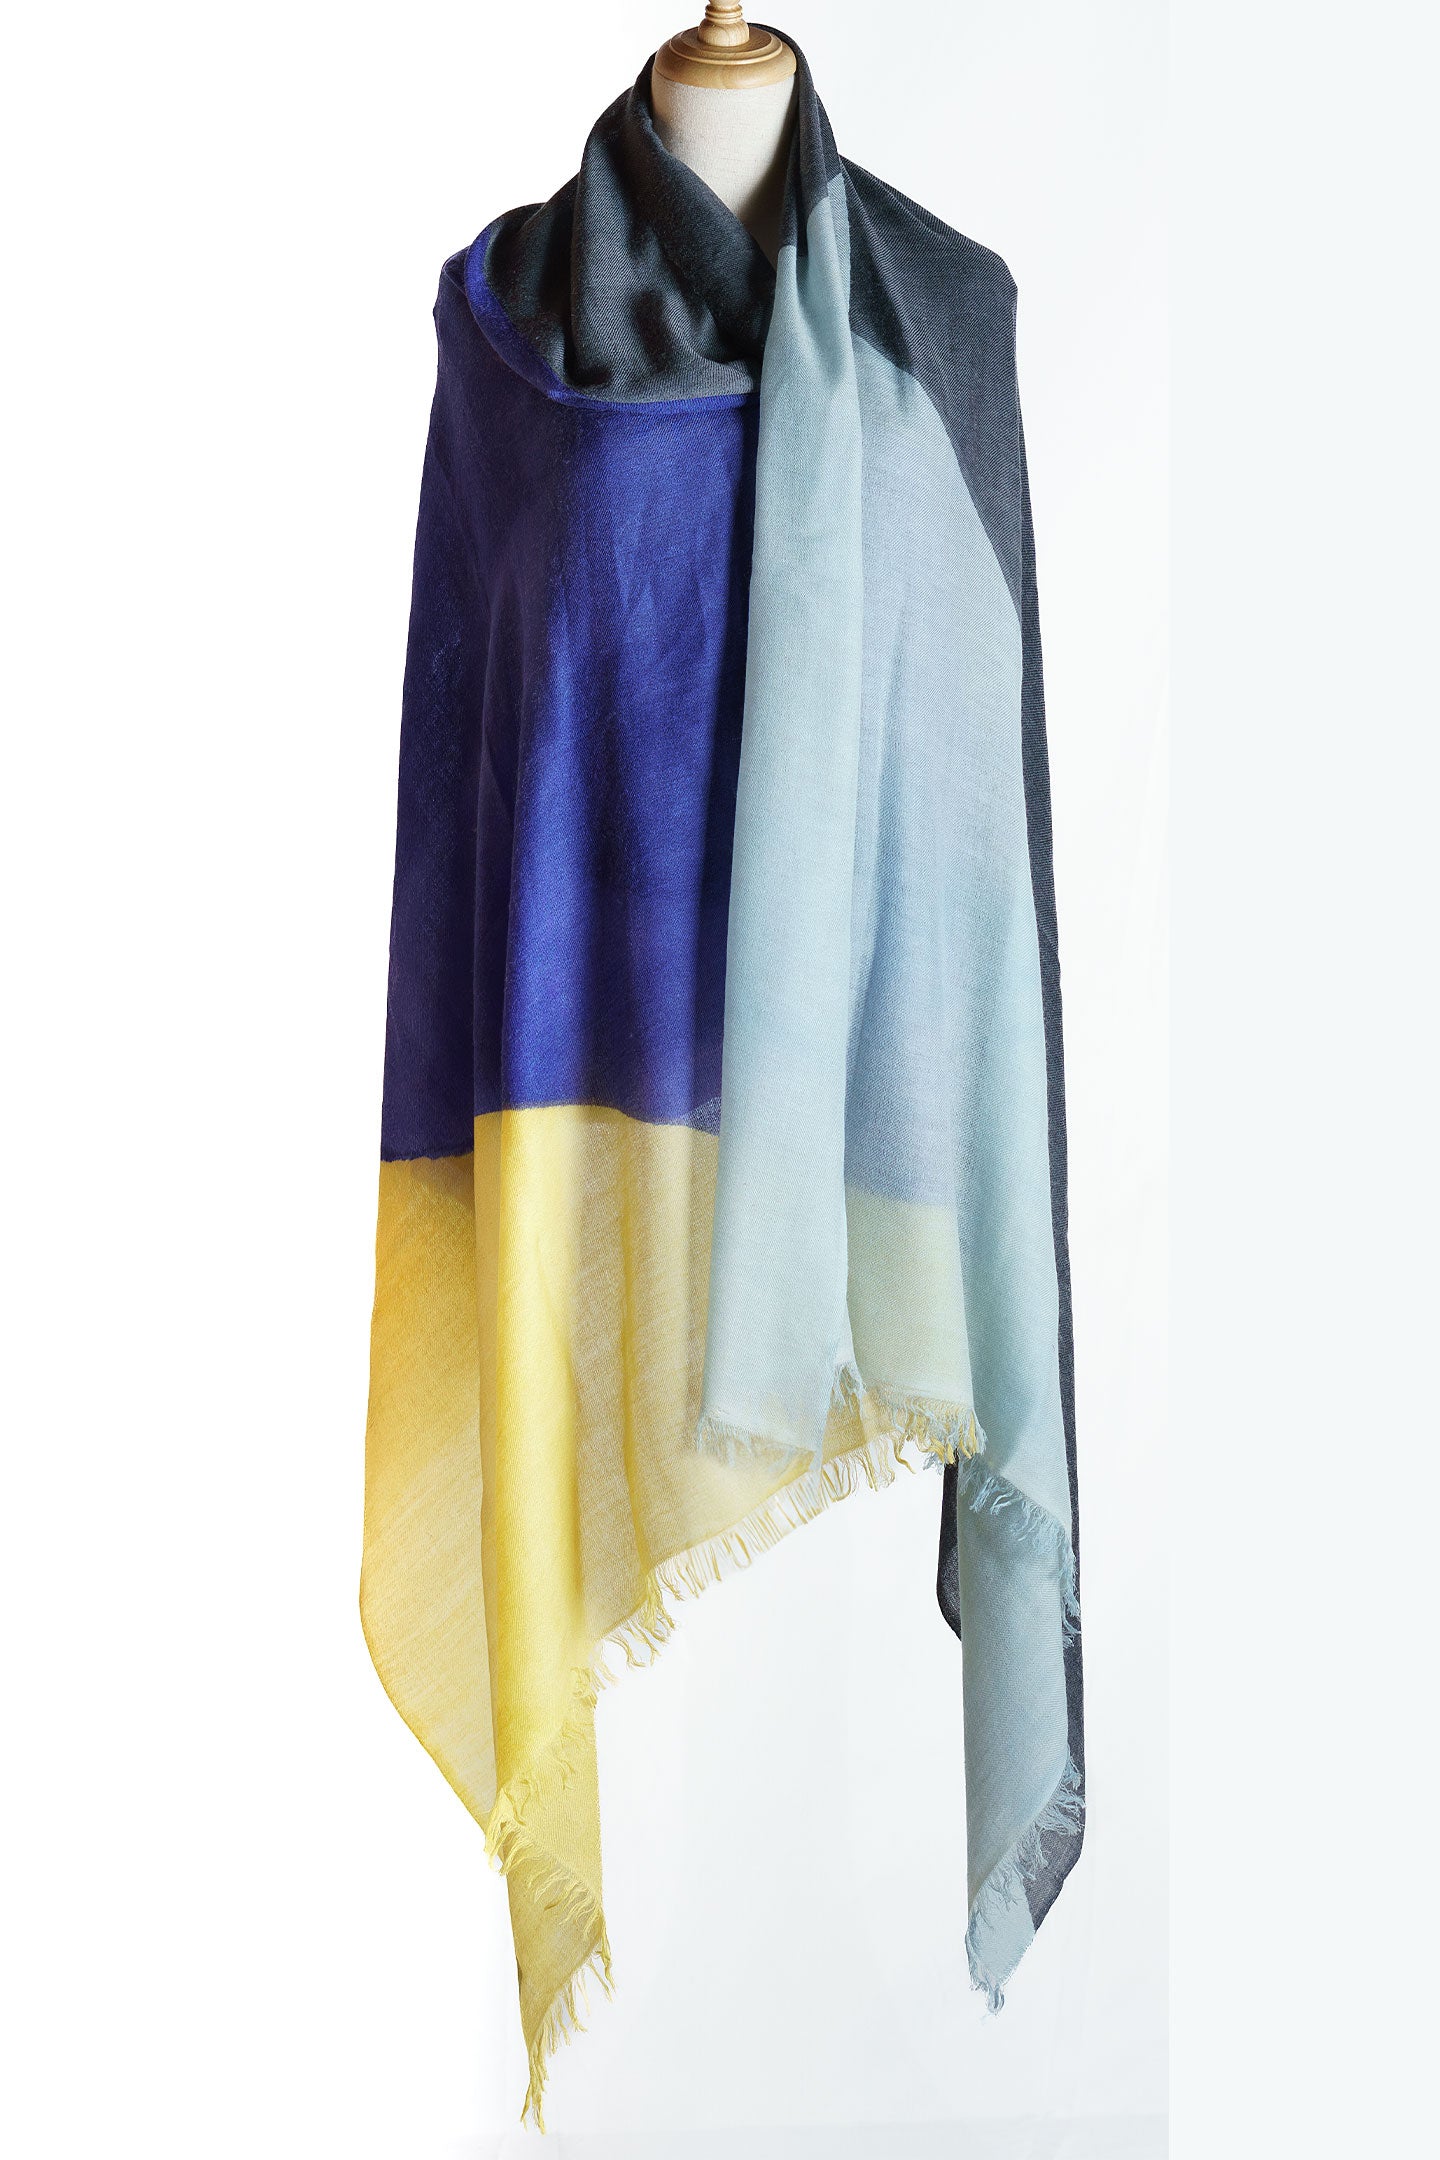 Cashmere Wrap in Vibrant Shades